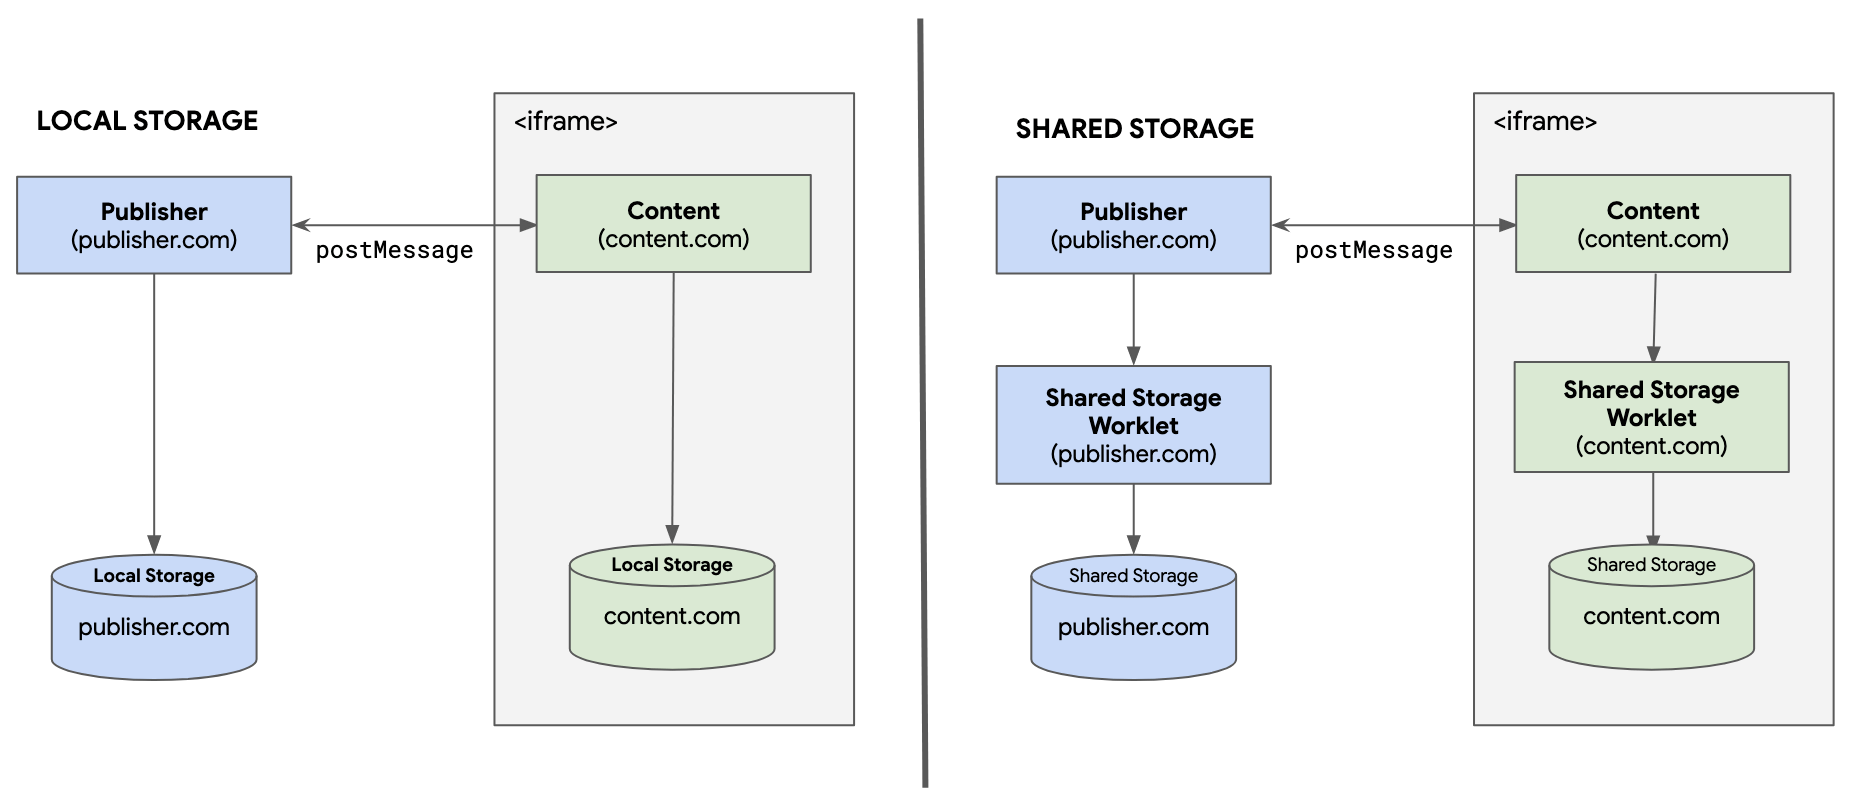 Diagram illustrating the difference between local storage and shared storage and communication with an iframe, as explained below